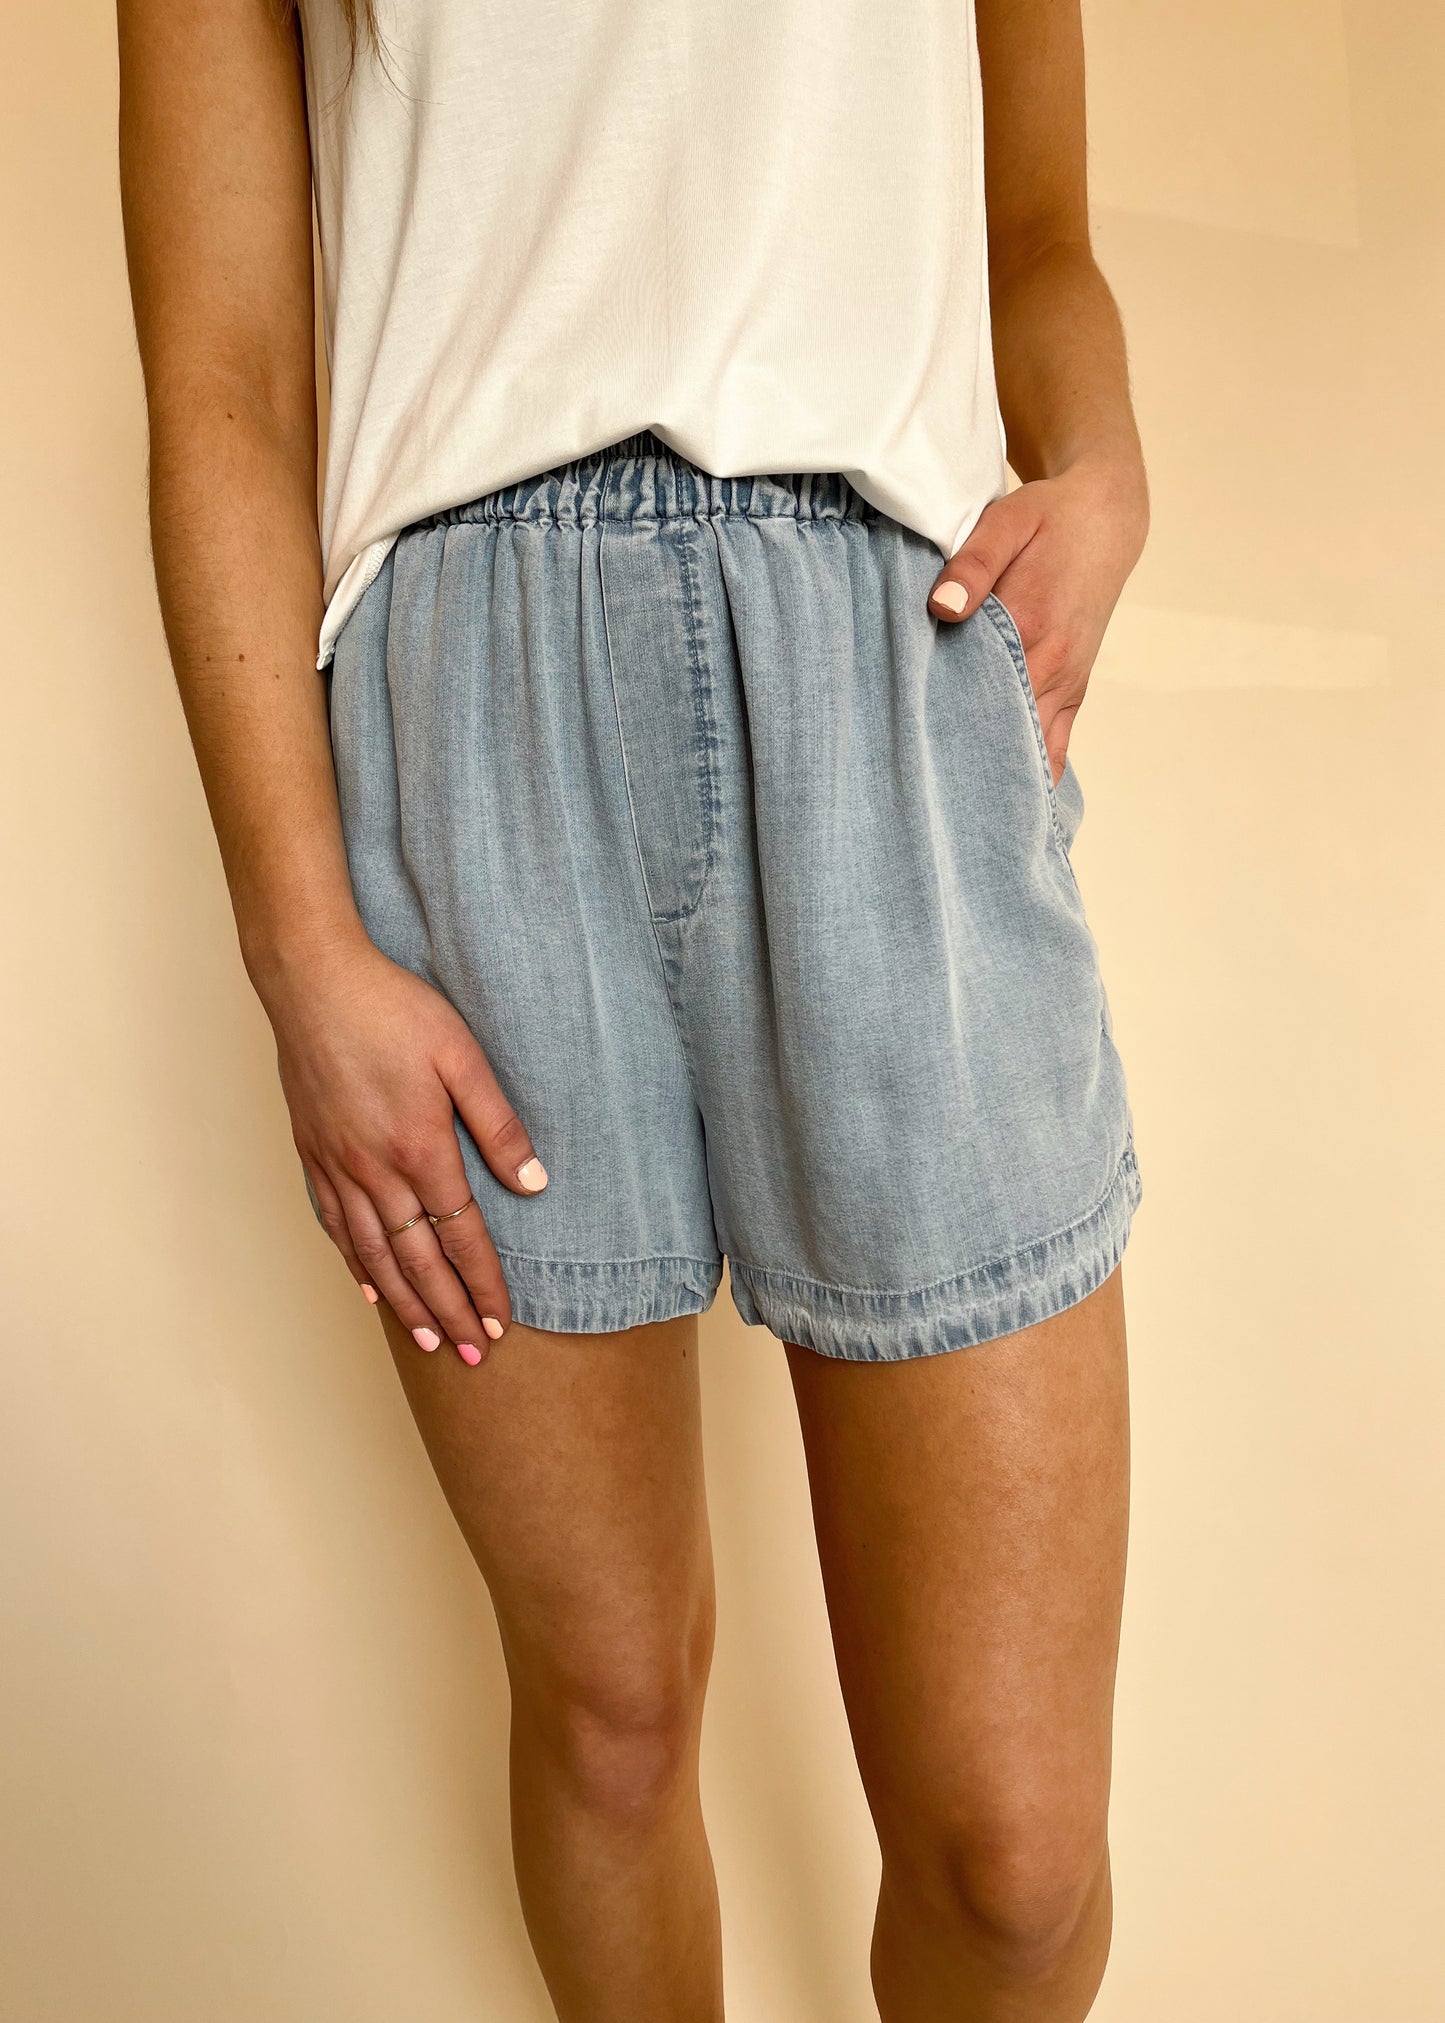 Gentle Fawn Ryder Shorts